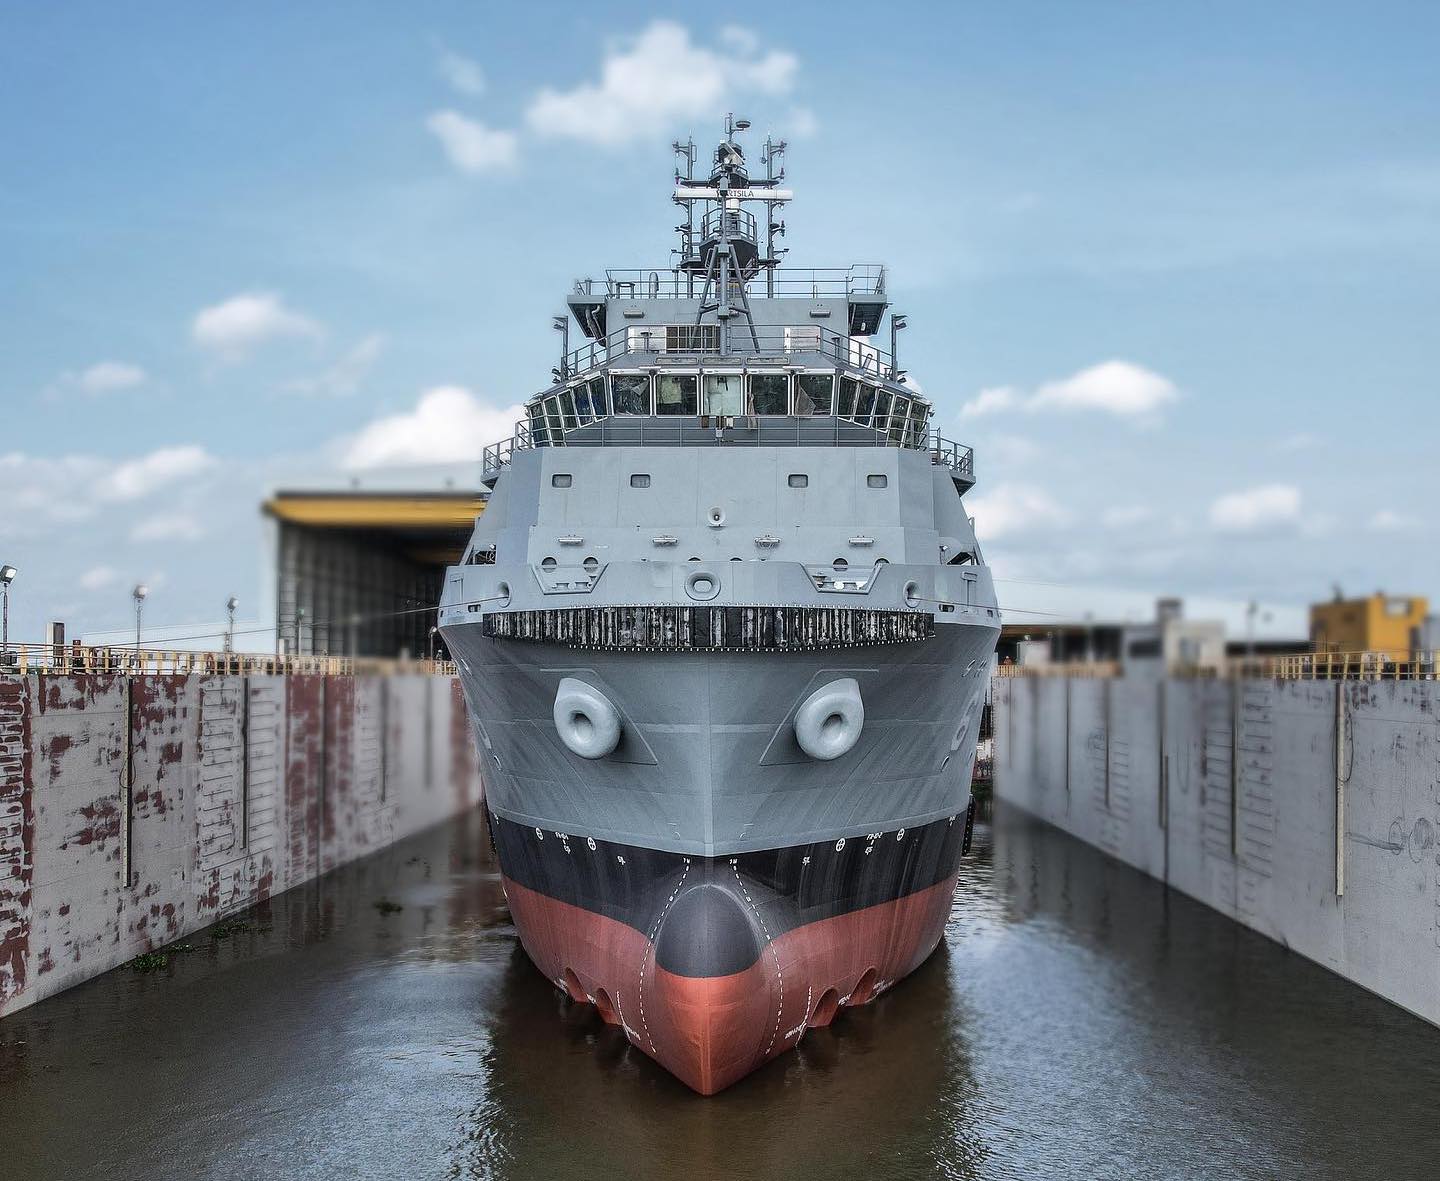 Bollinger Shipyards launched the the lead ship in the U.S. Navy’s new Navajo-Class vessels in May 2023 (Credit: Bollinger Shipyards)